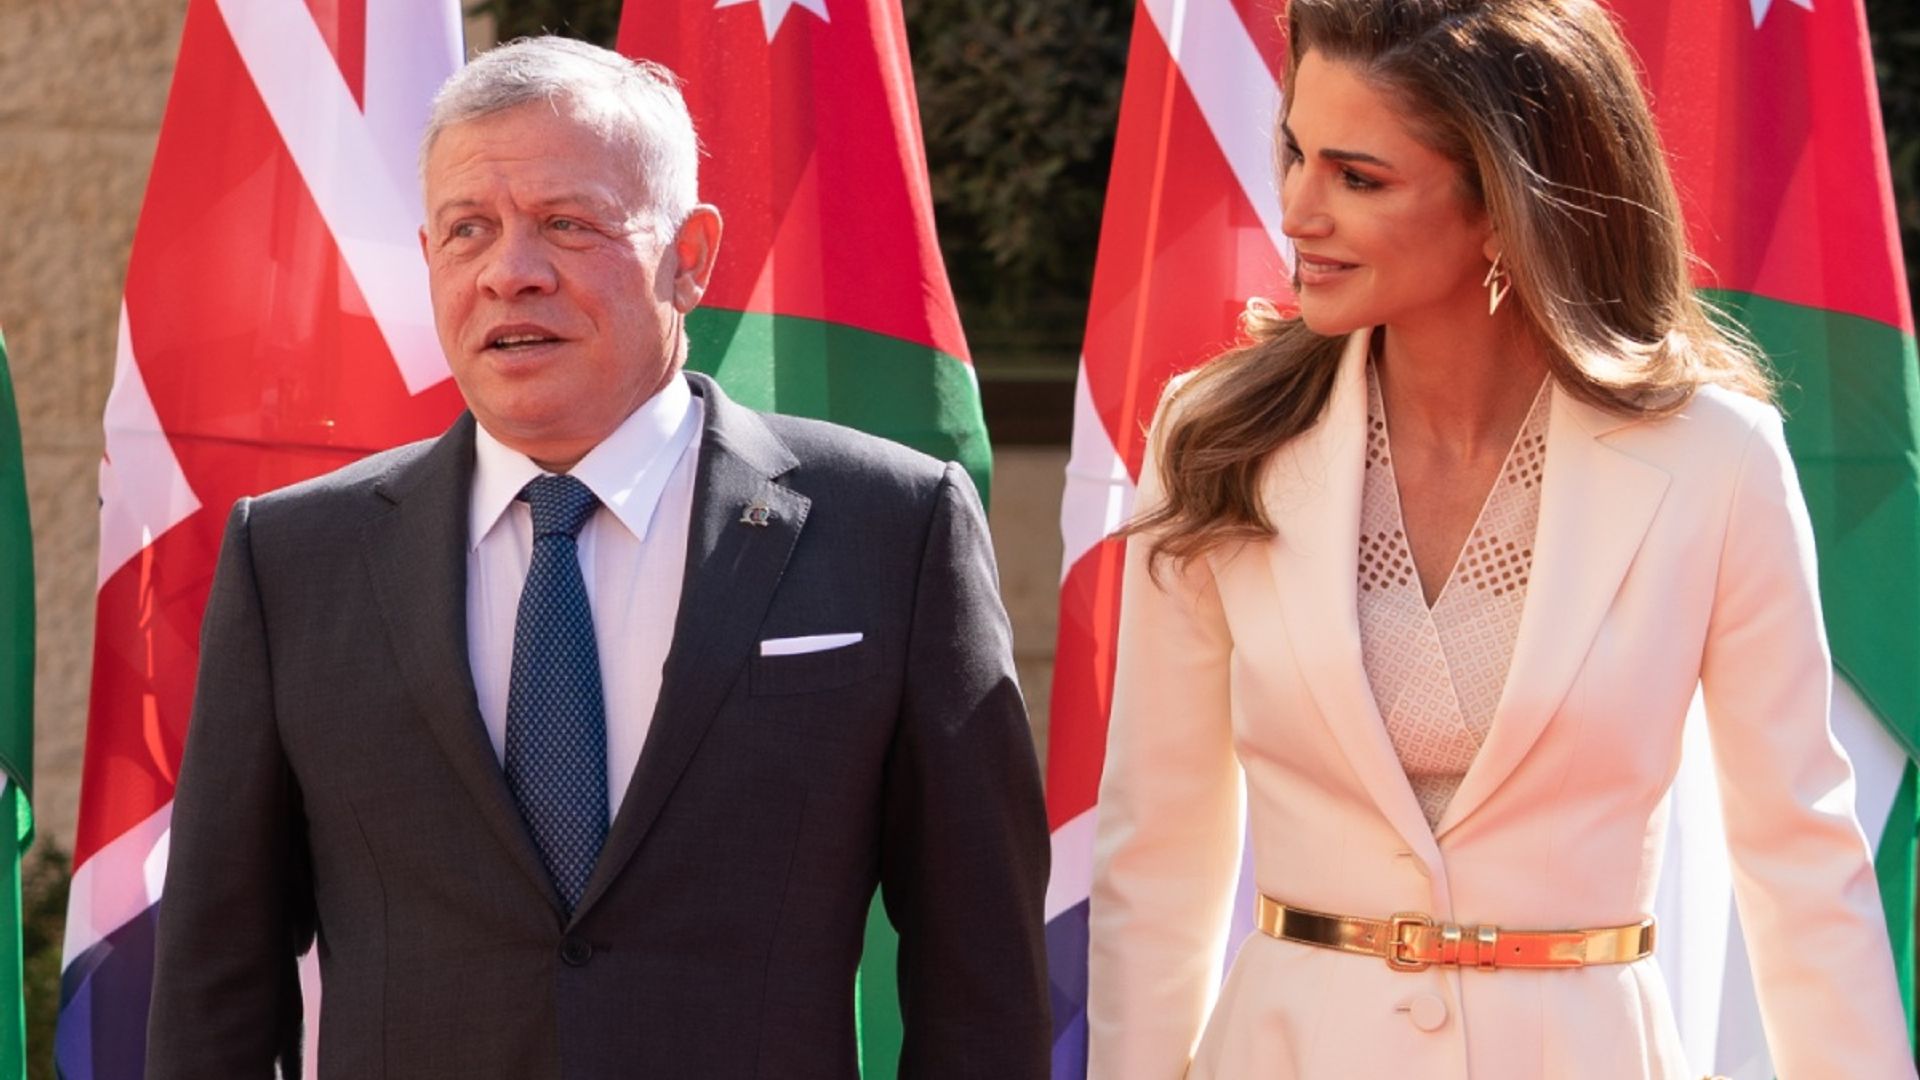 Queen Ranias Husband The King Of Jordan Undergoes Emergency Spinal Surgery Hello